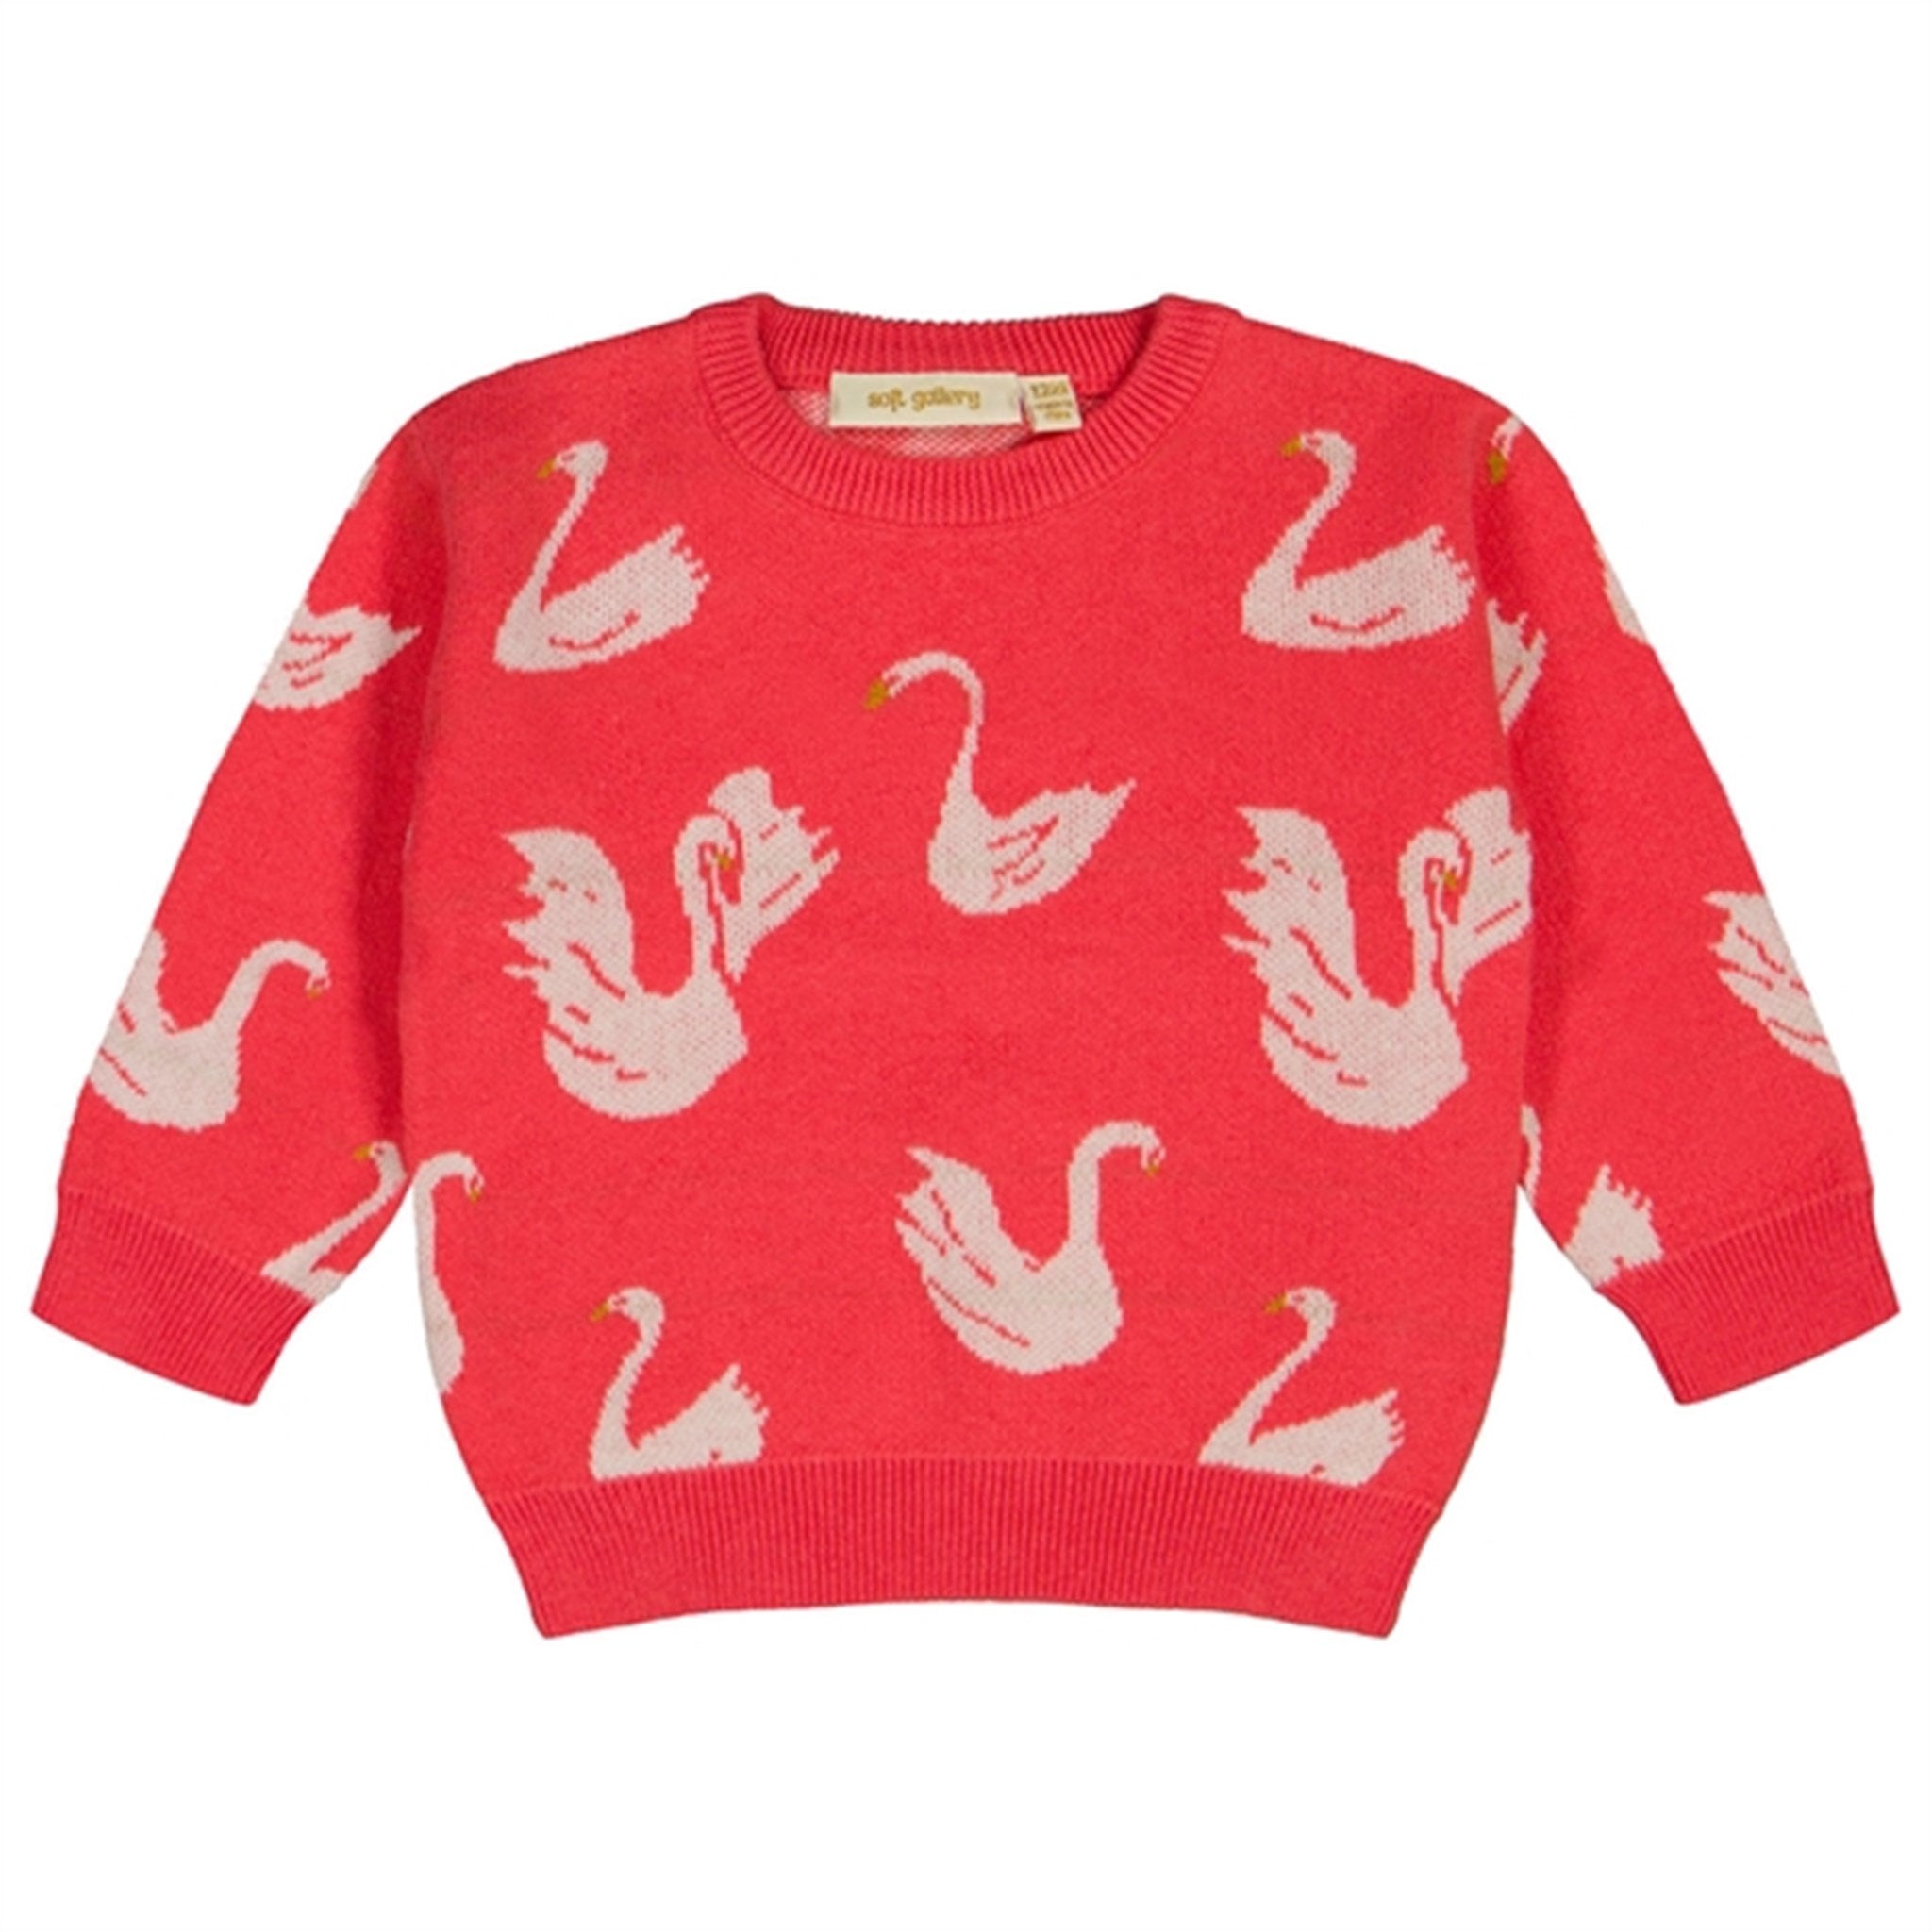 Soft Gallery Mineral Red My Swan Knit Blouse